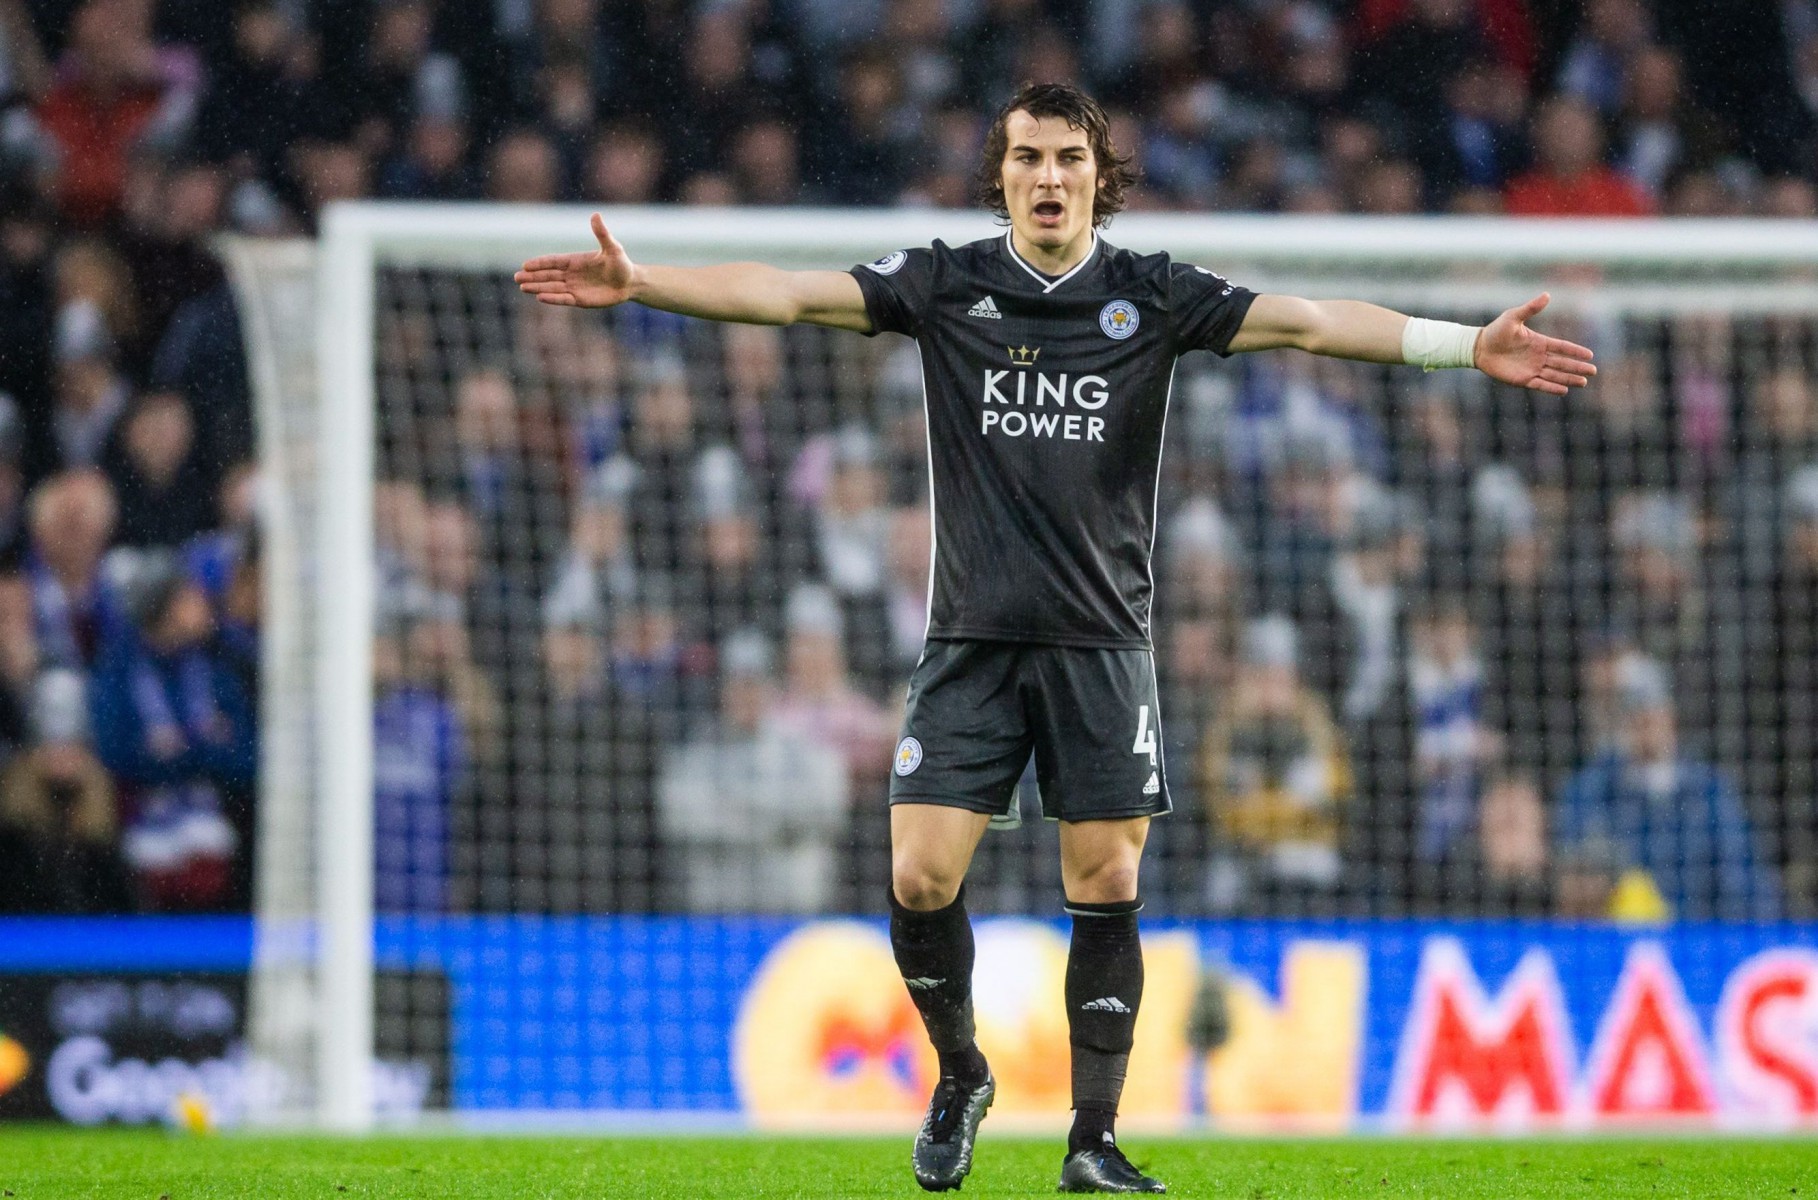 , Man City target Leicester ace Soyuncu as Kompany replacement as Pep looks to transfer market to plug leaky defence